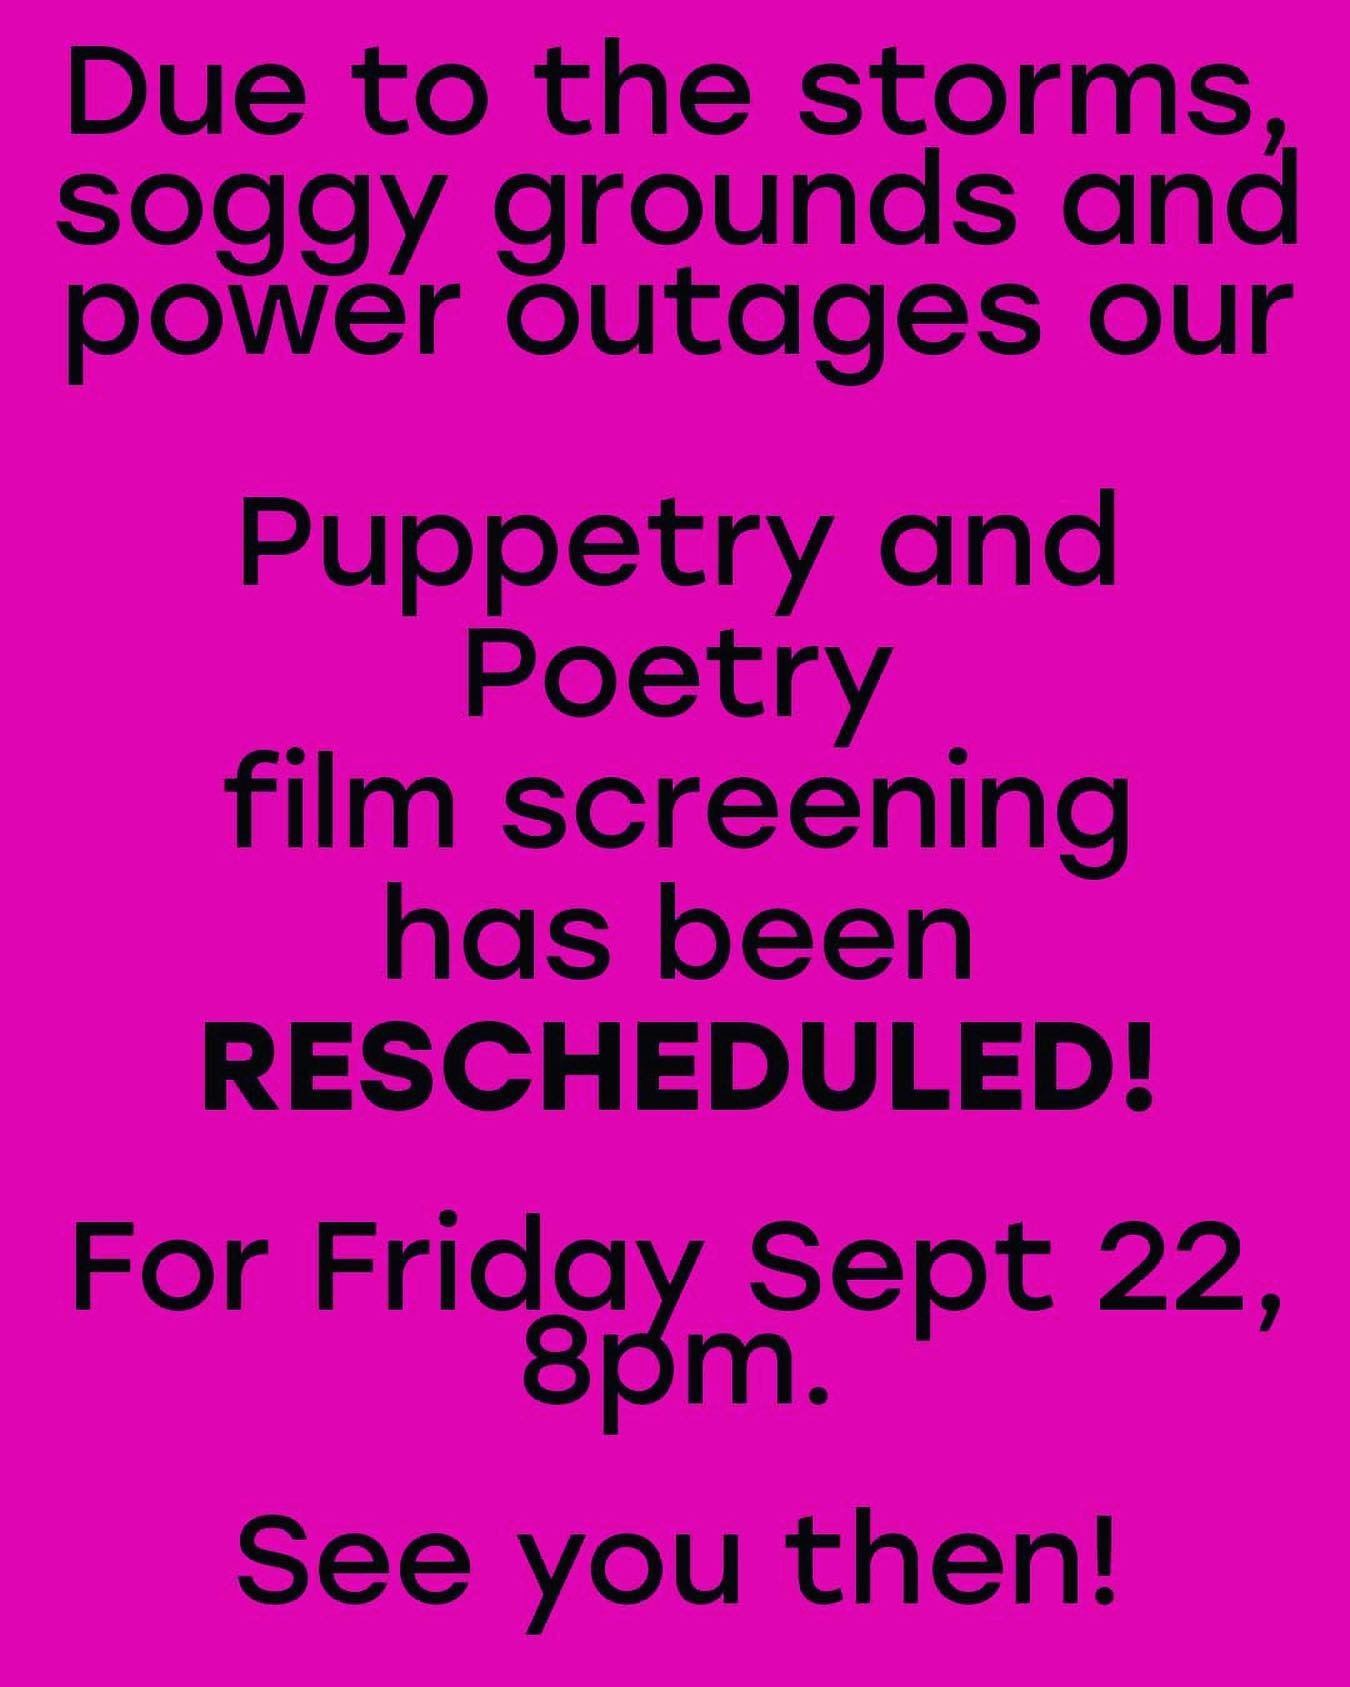 Hi folks, we hope everyone is safe today and power is restored to all soon. Please bear with us as we reschedule our Puppetry and Poetry screenings for Friday September 22, 8pm. Thank you and see you then!